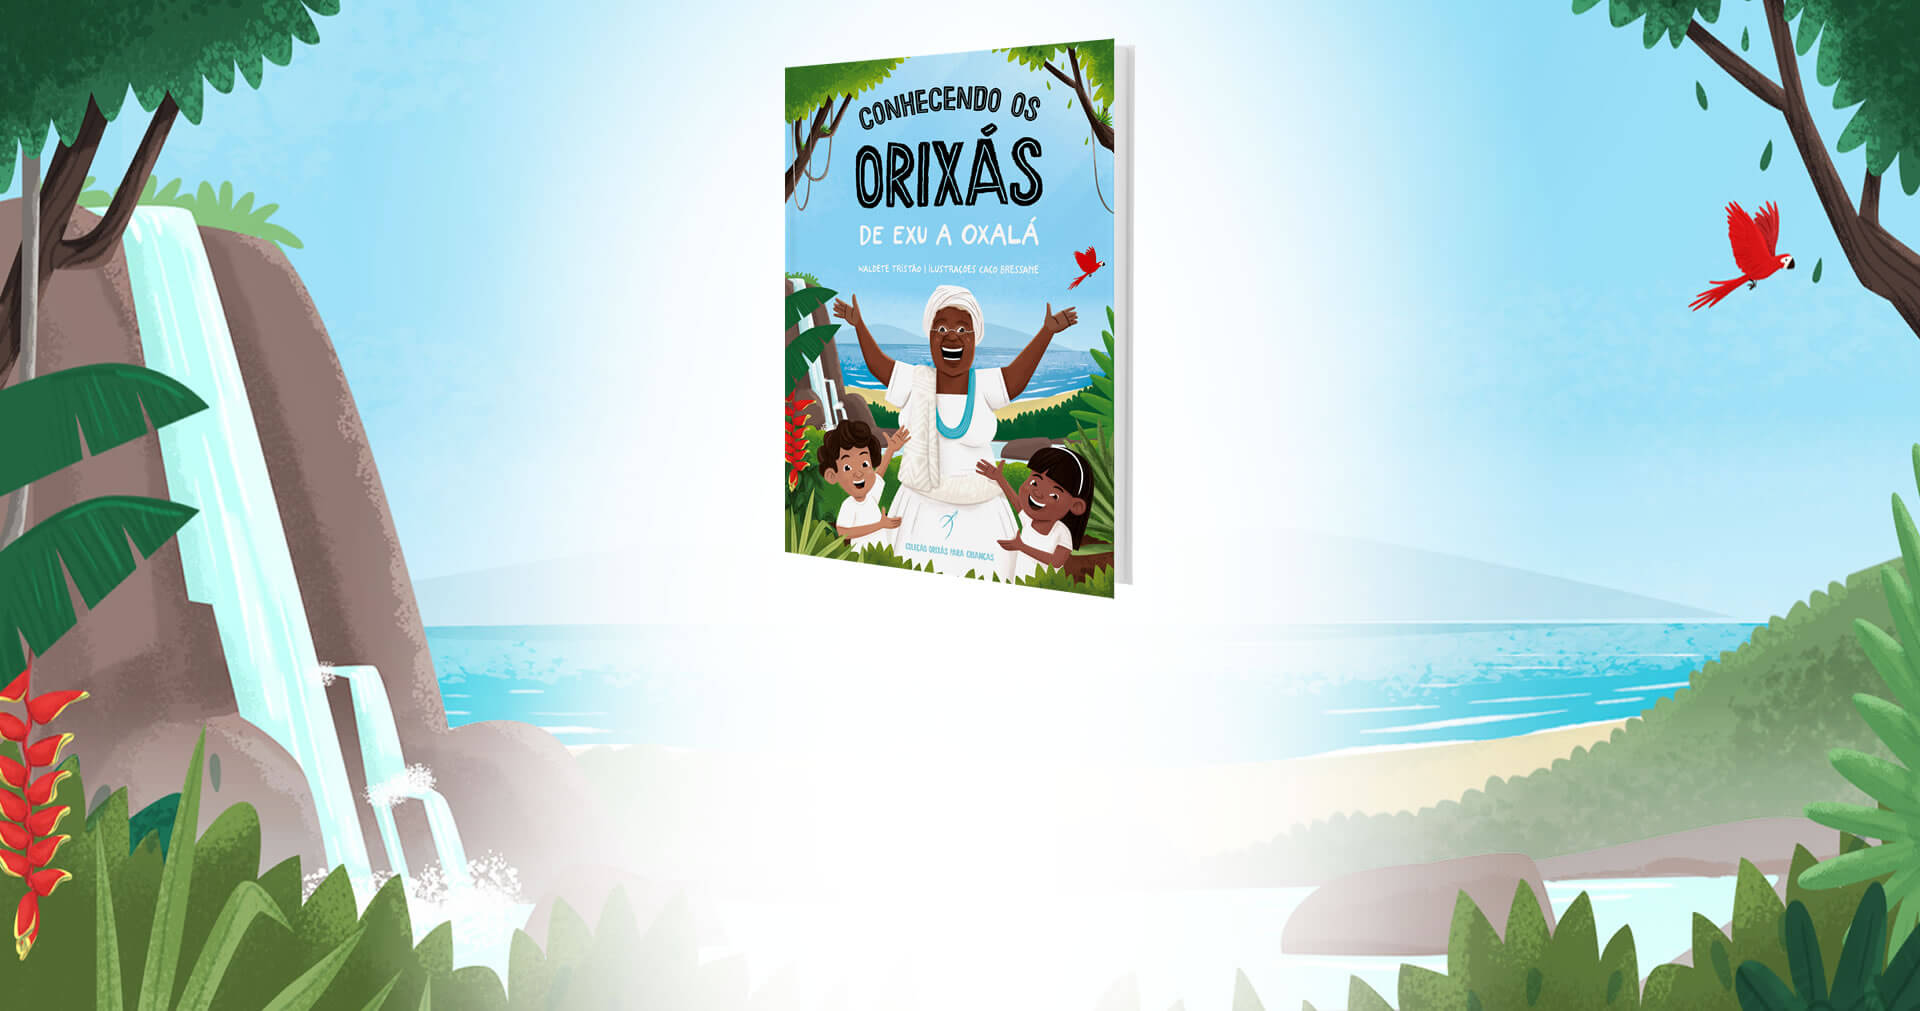 Orixás Para Crianças | Knowing the Orishas is the first volume of the children book series, with 18 titles about the African Gods of Nature.